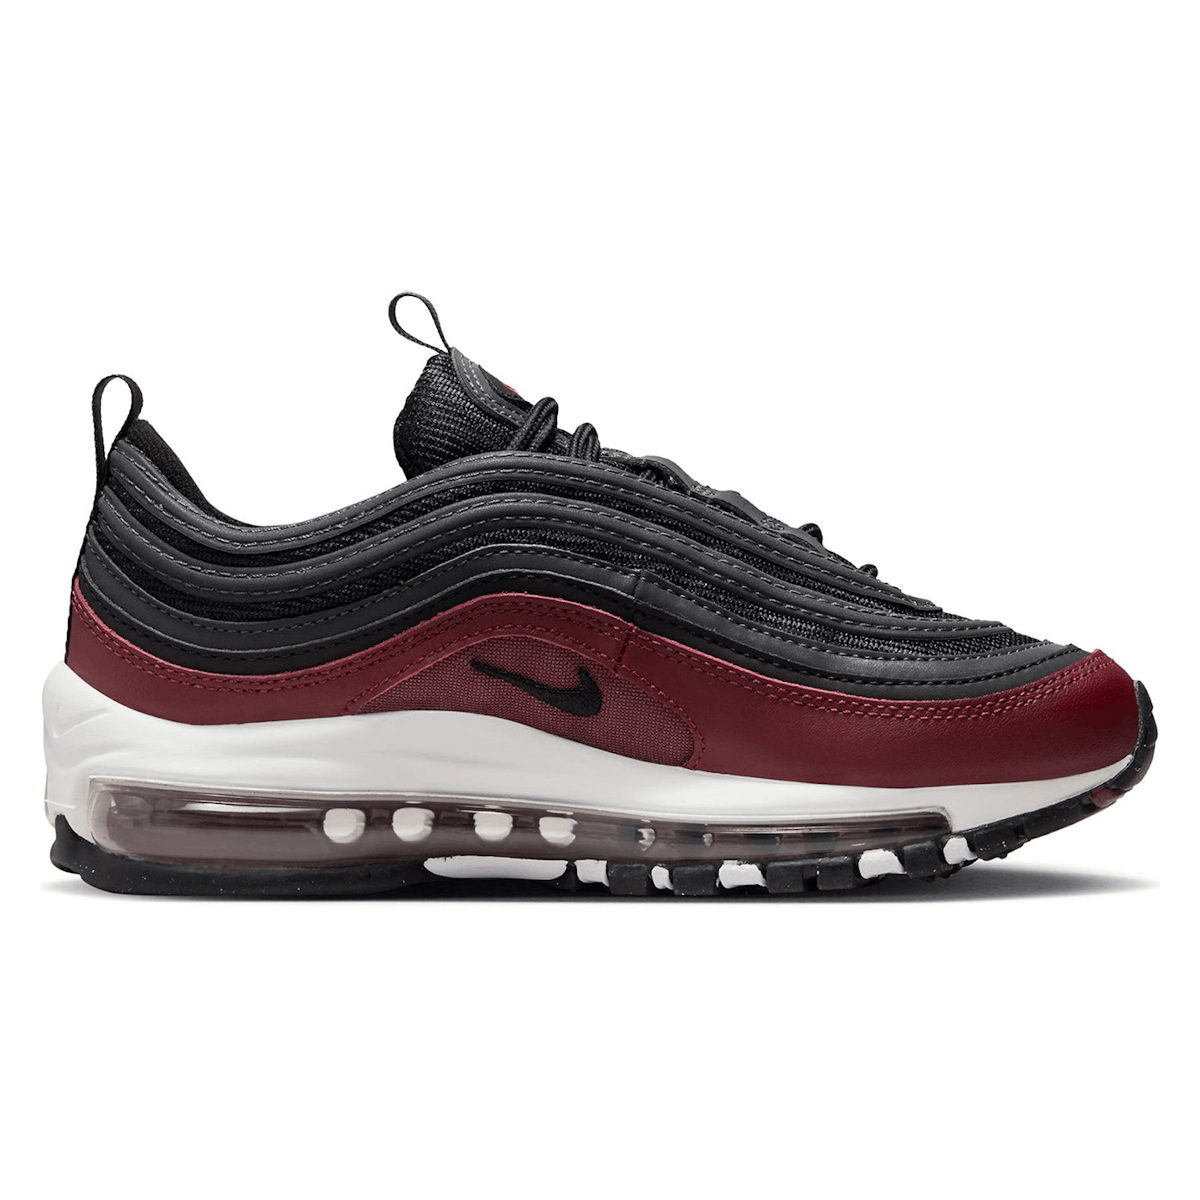 Nike Air Max 97 Team Red Anthracite (GS)